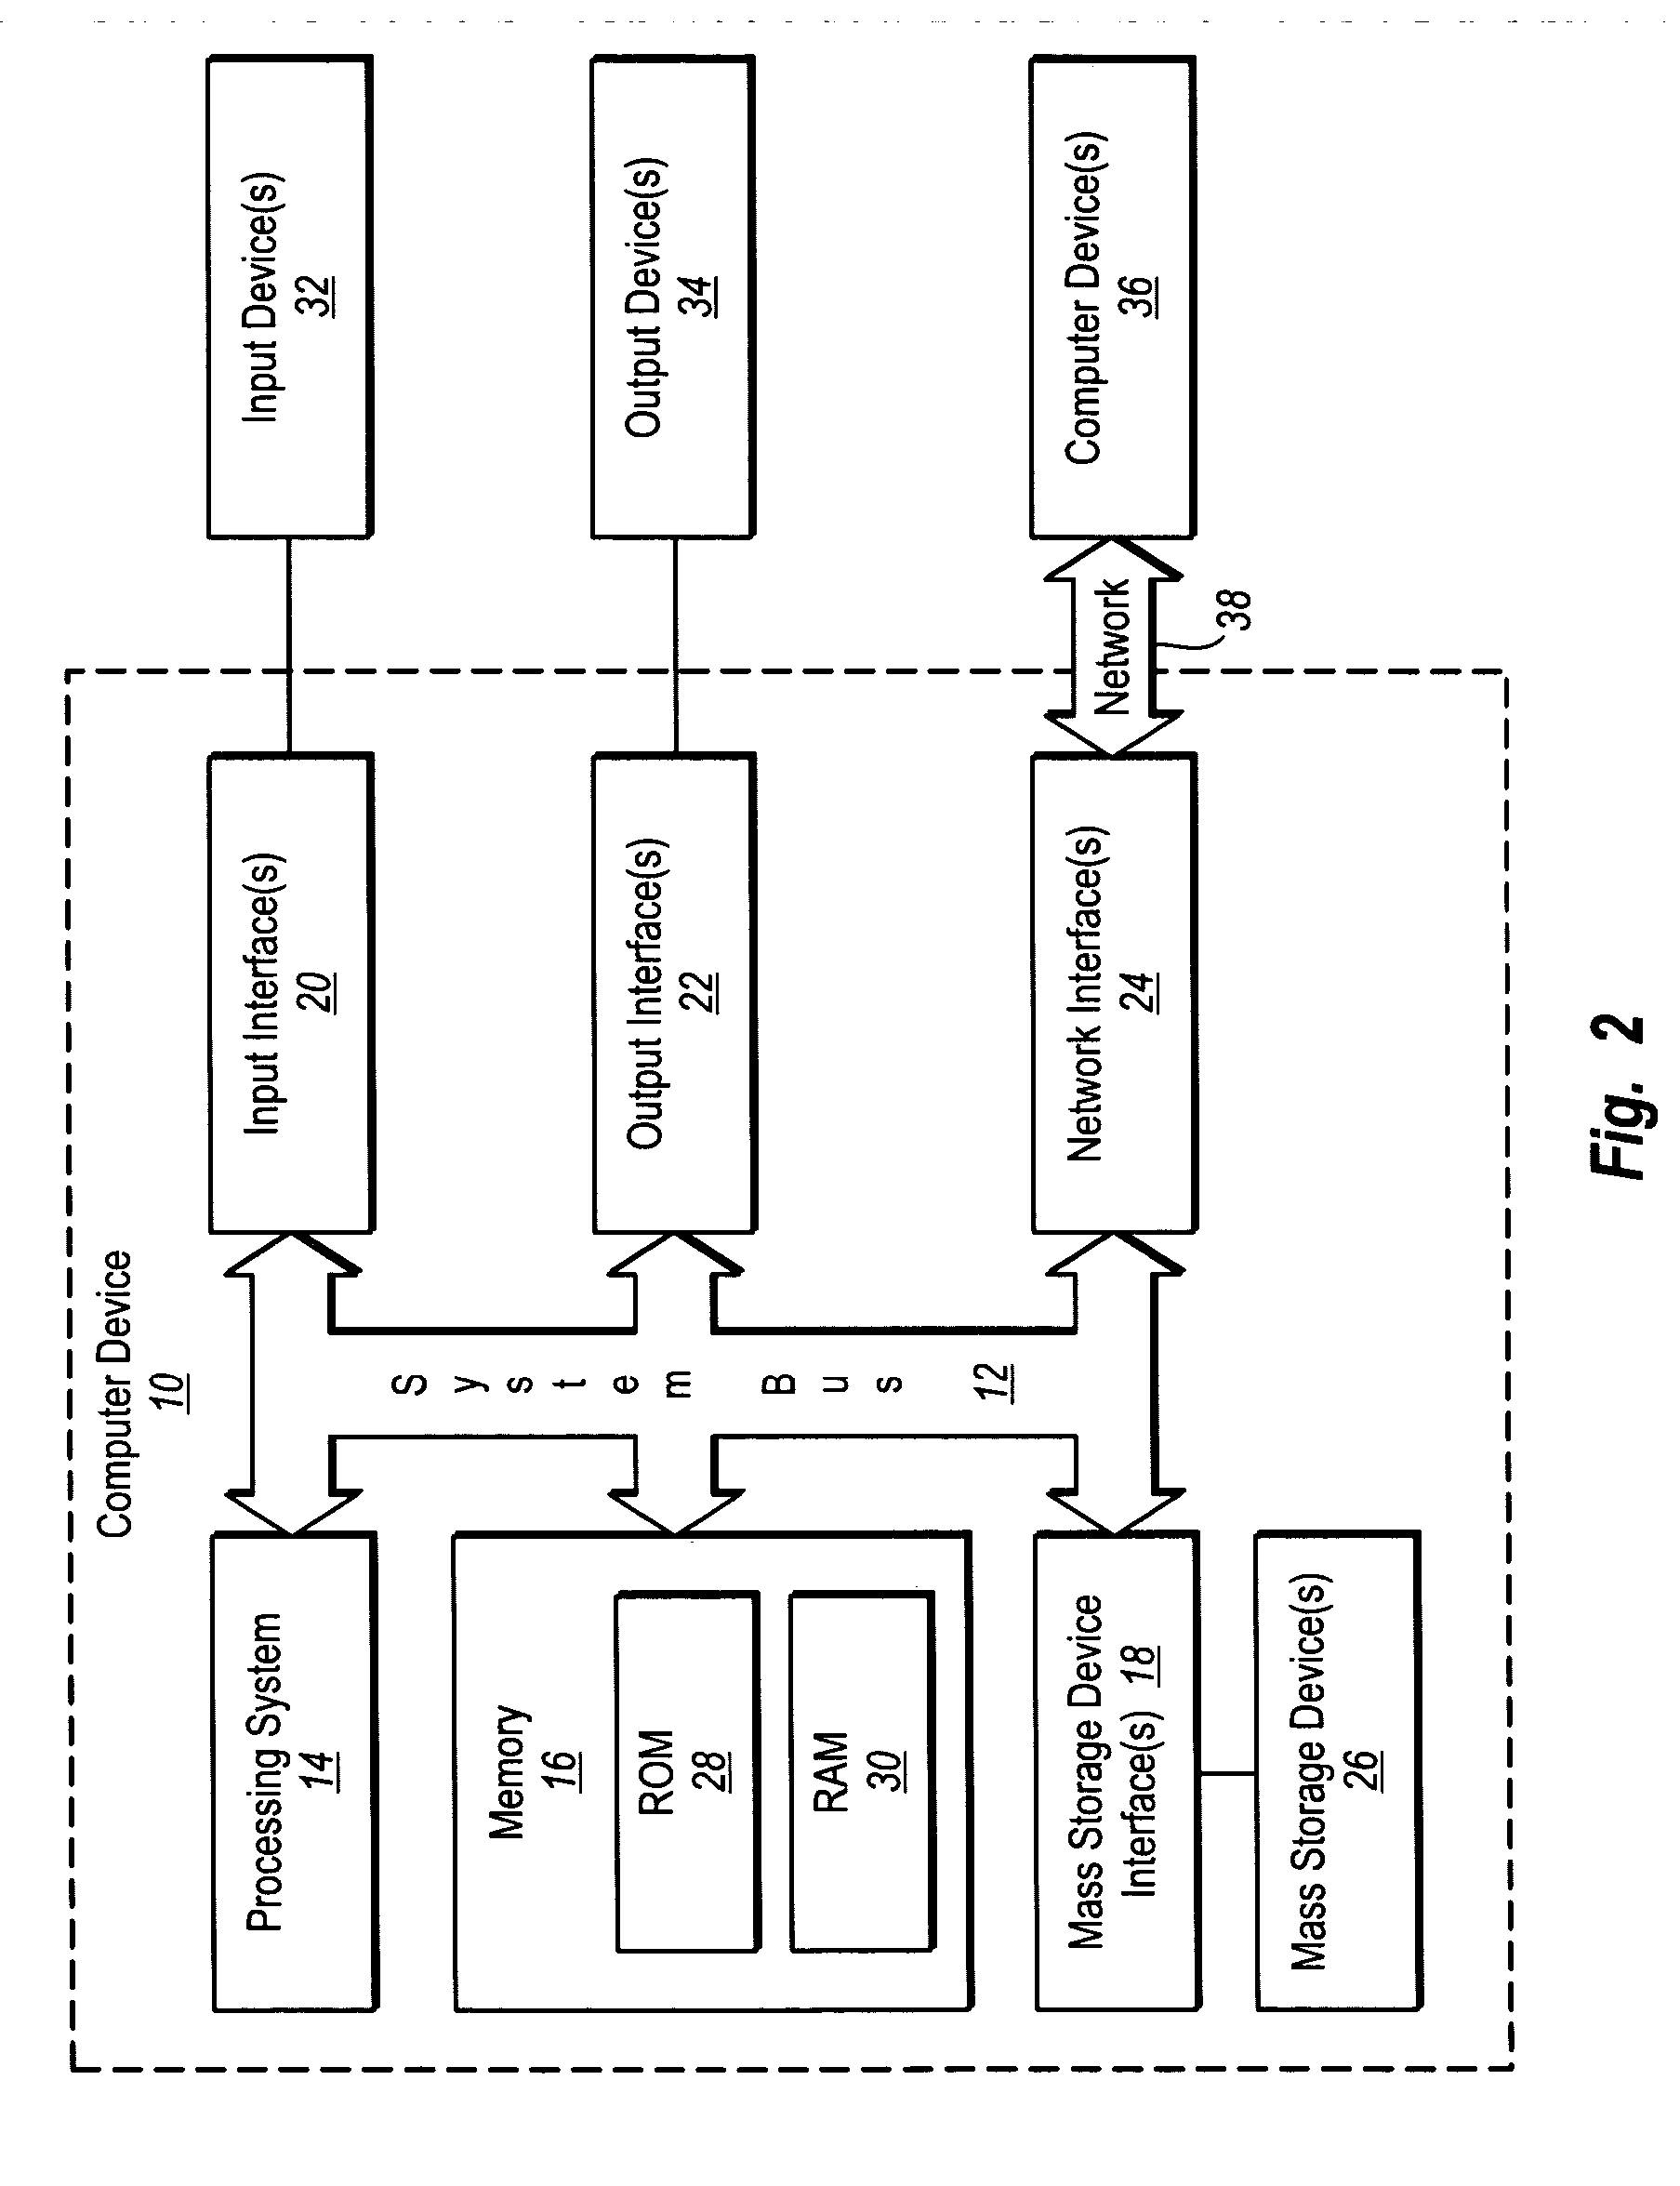 Systems and methods for providing load balance rendering for direct printing